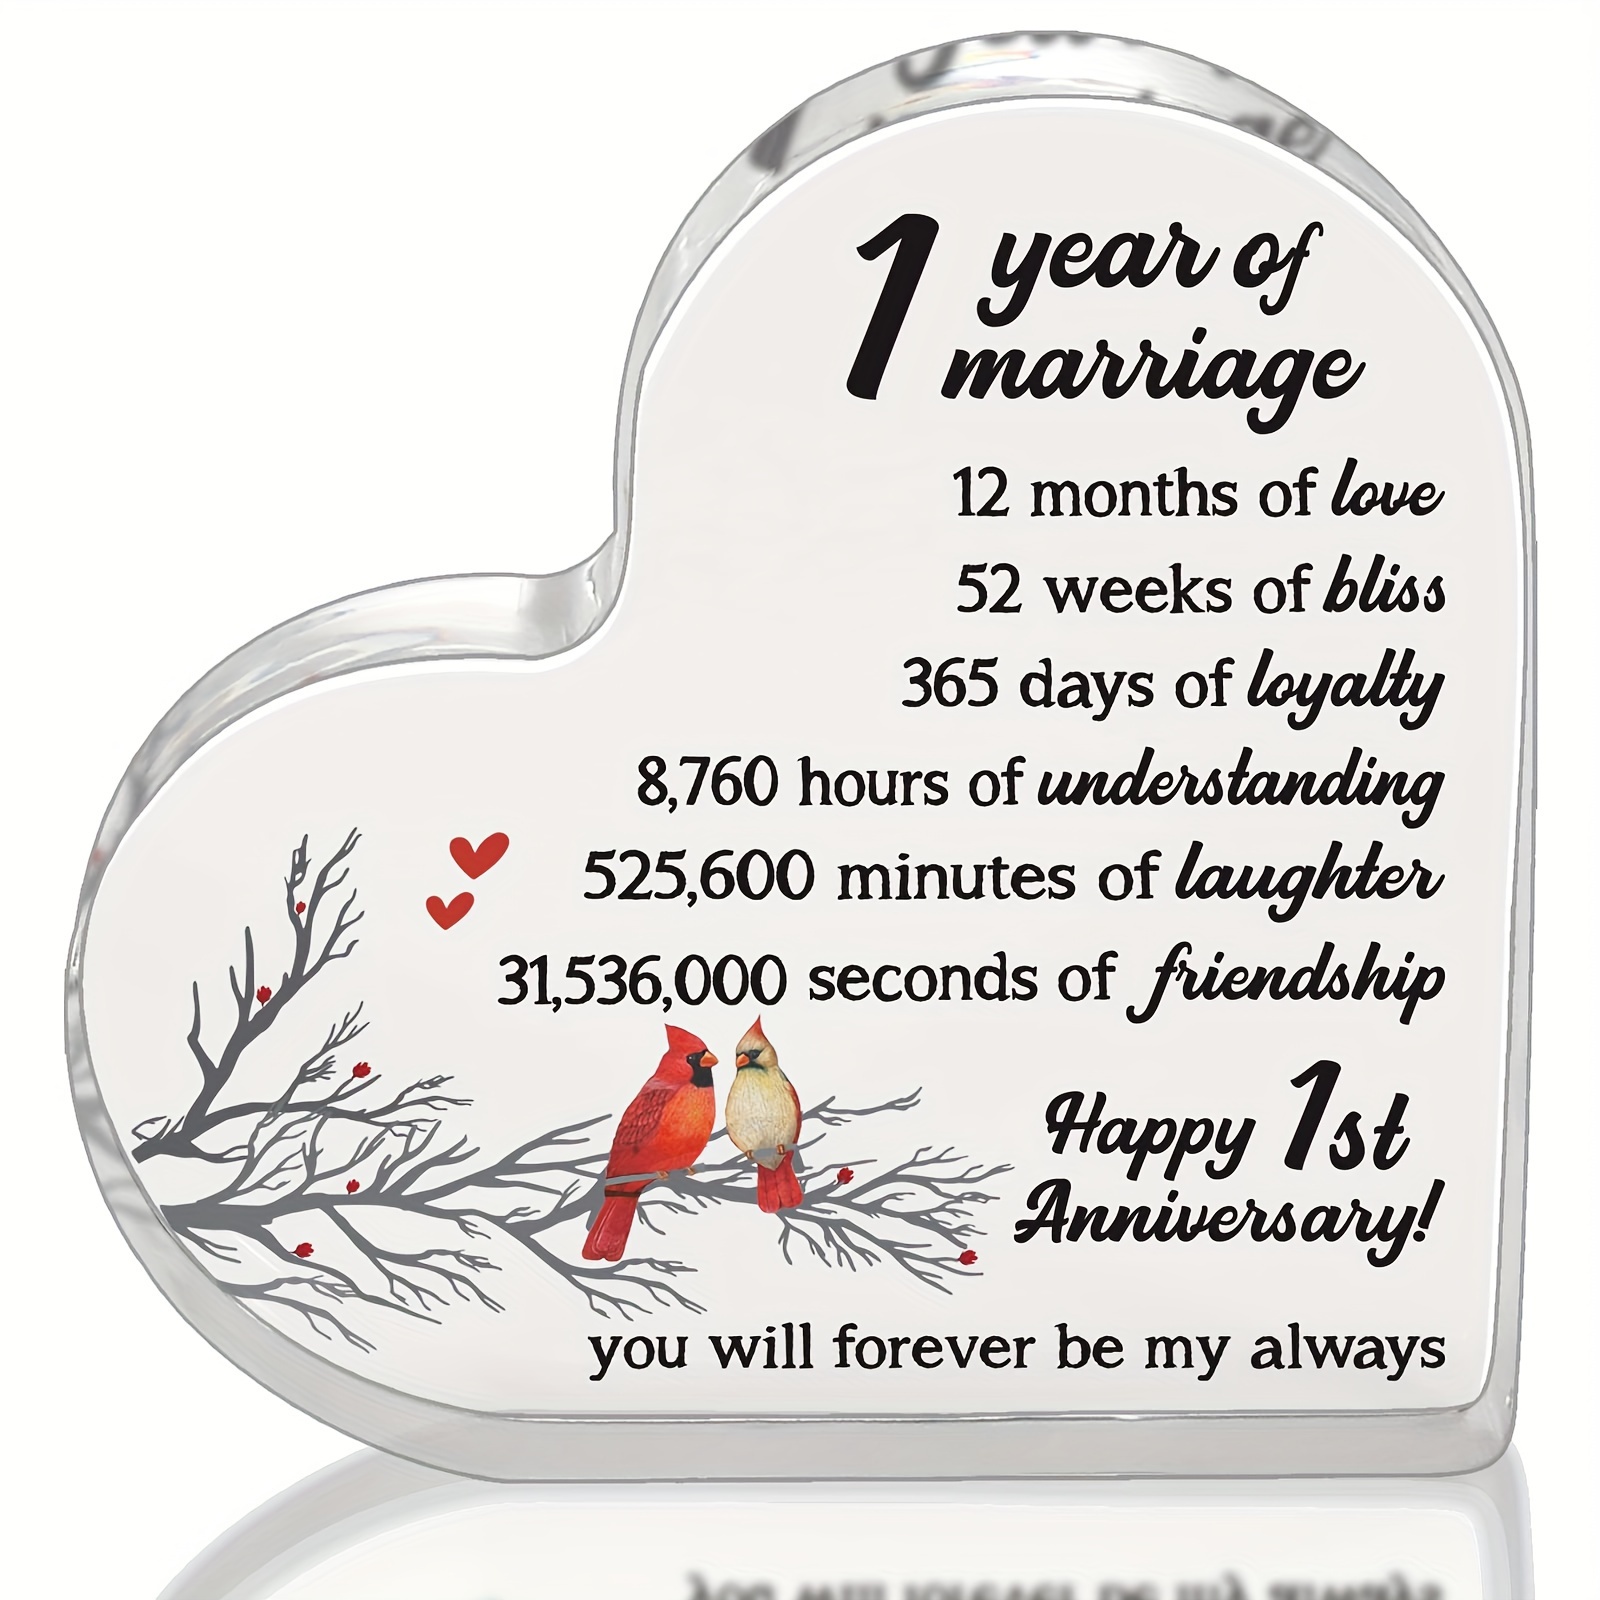 Marriage Anniversary Wedding Gifts for Women, Happy 1st Anniversary Wedding  Gifts for Husband Wife Friends, 1 Year of Marriage Gift Keepsake Heart